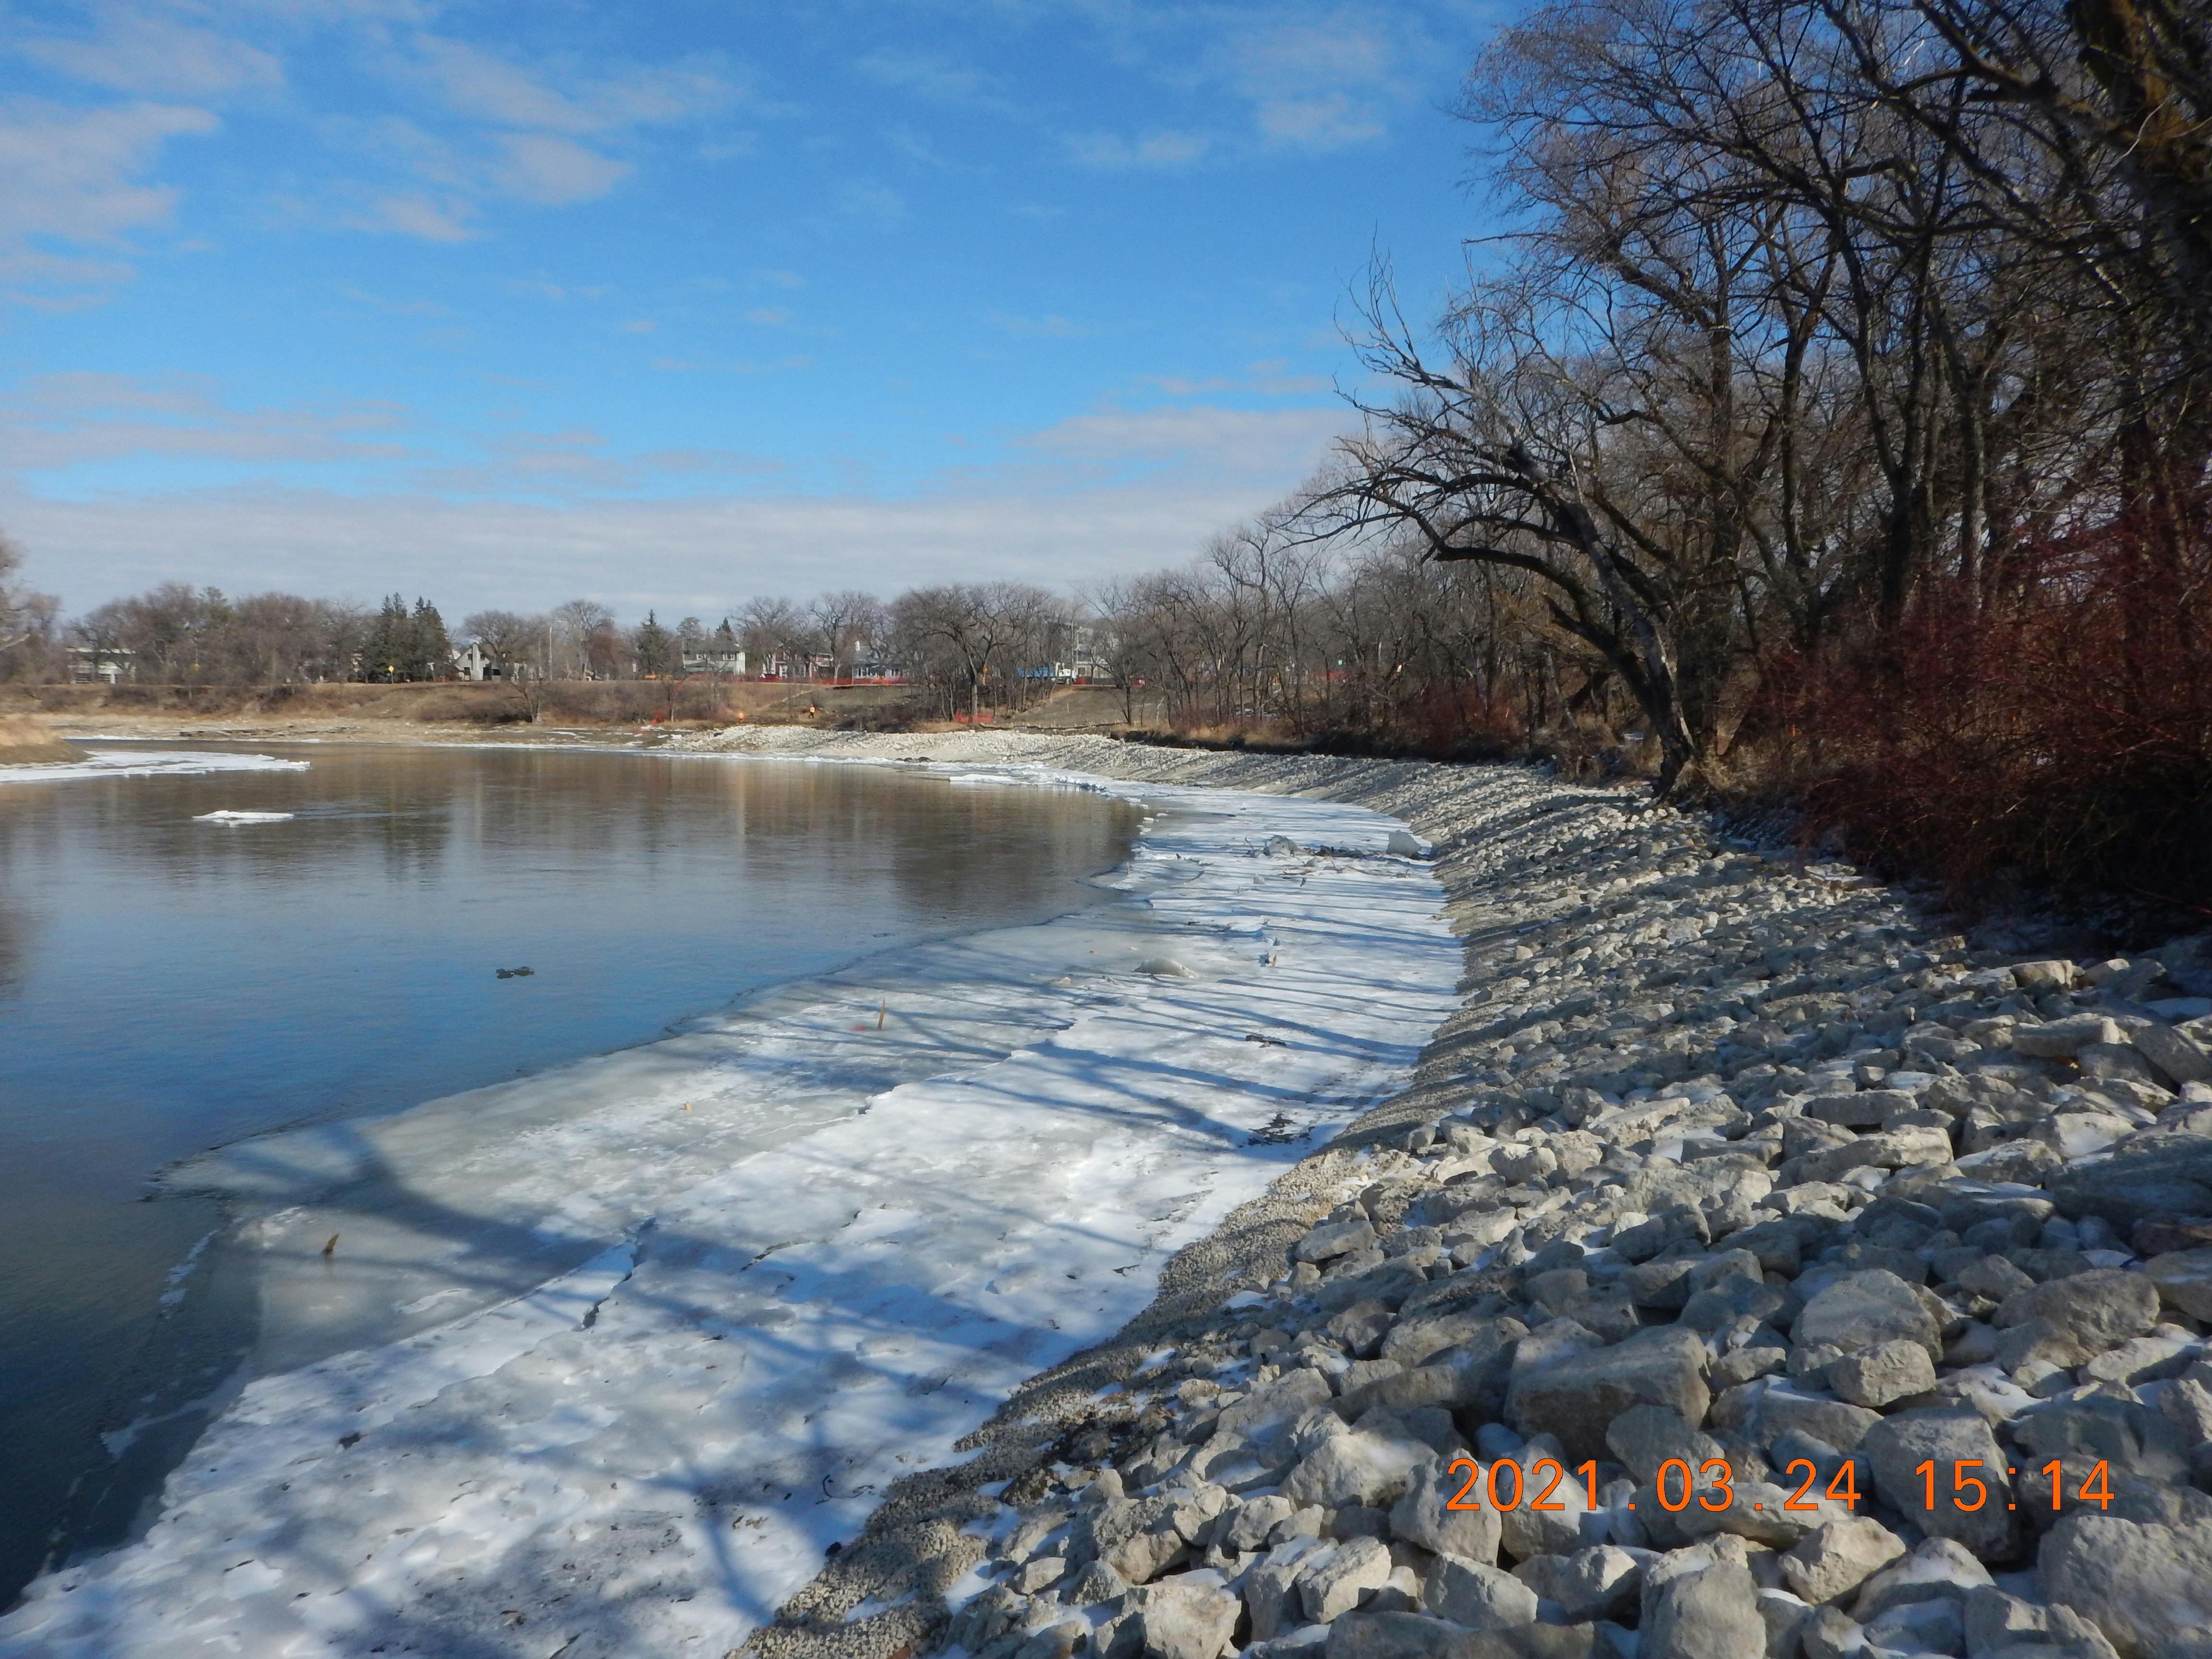 Riprap placed along the riverbank for erosion protection - March 2021